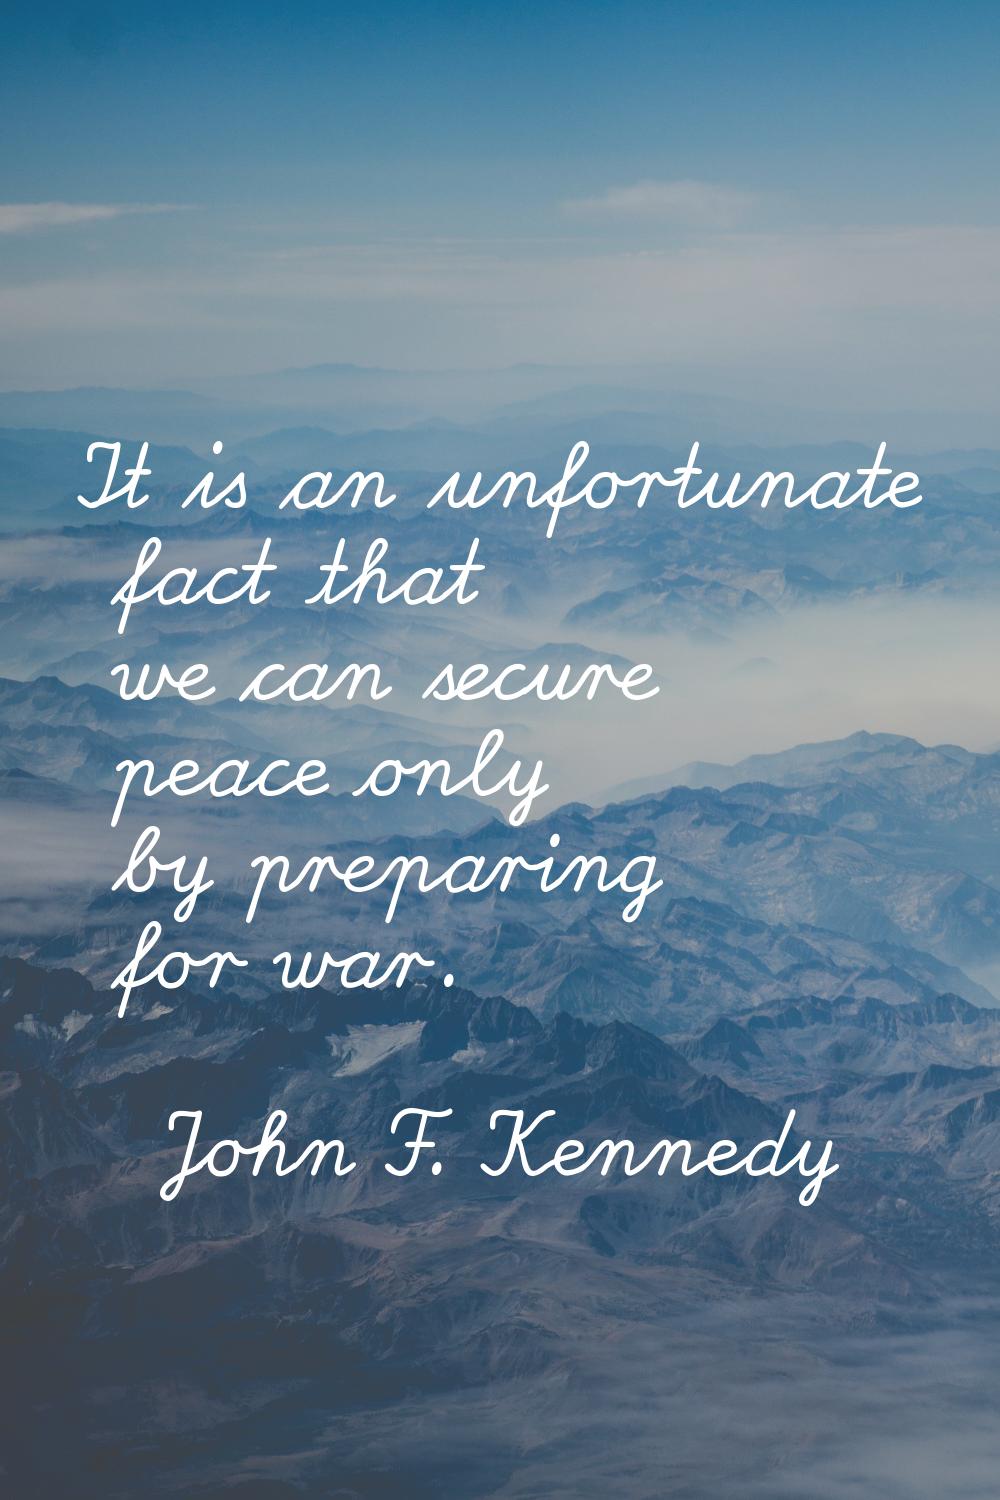 It is an unfortunate fact that we can secure peace only by preparing for war.